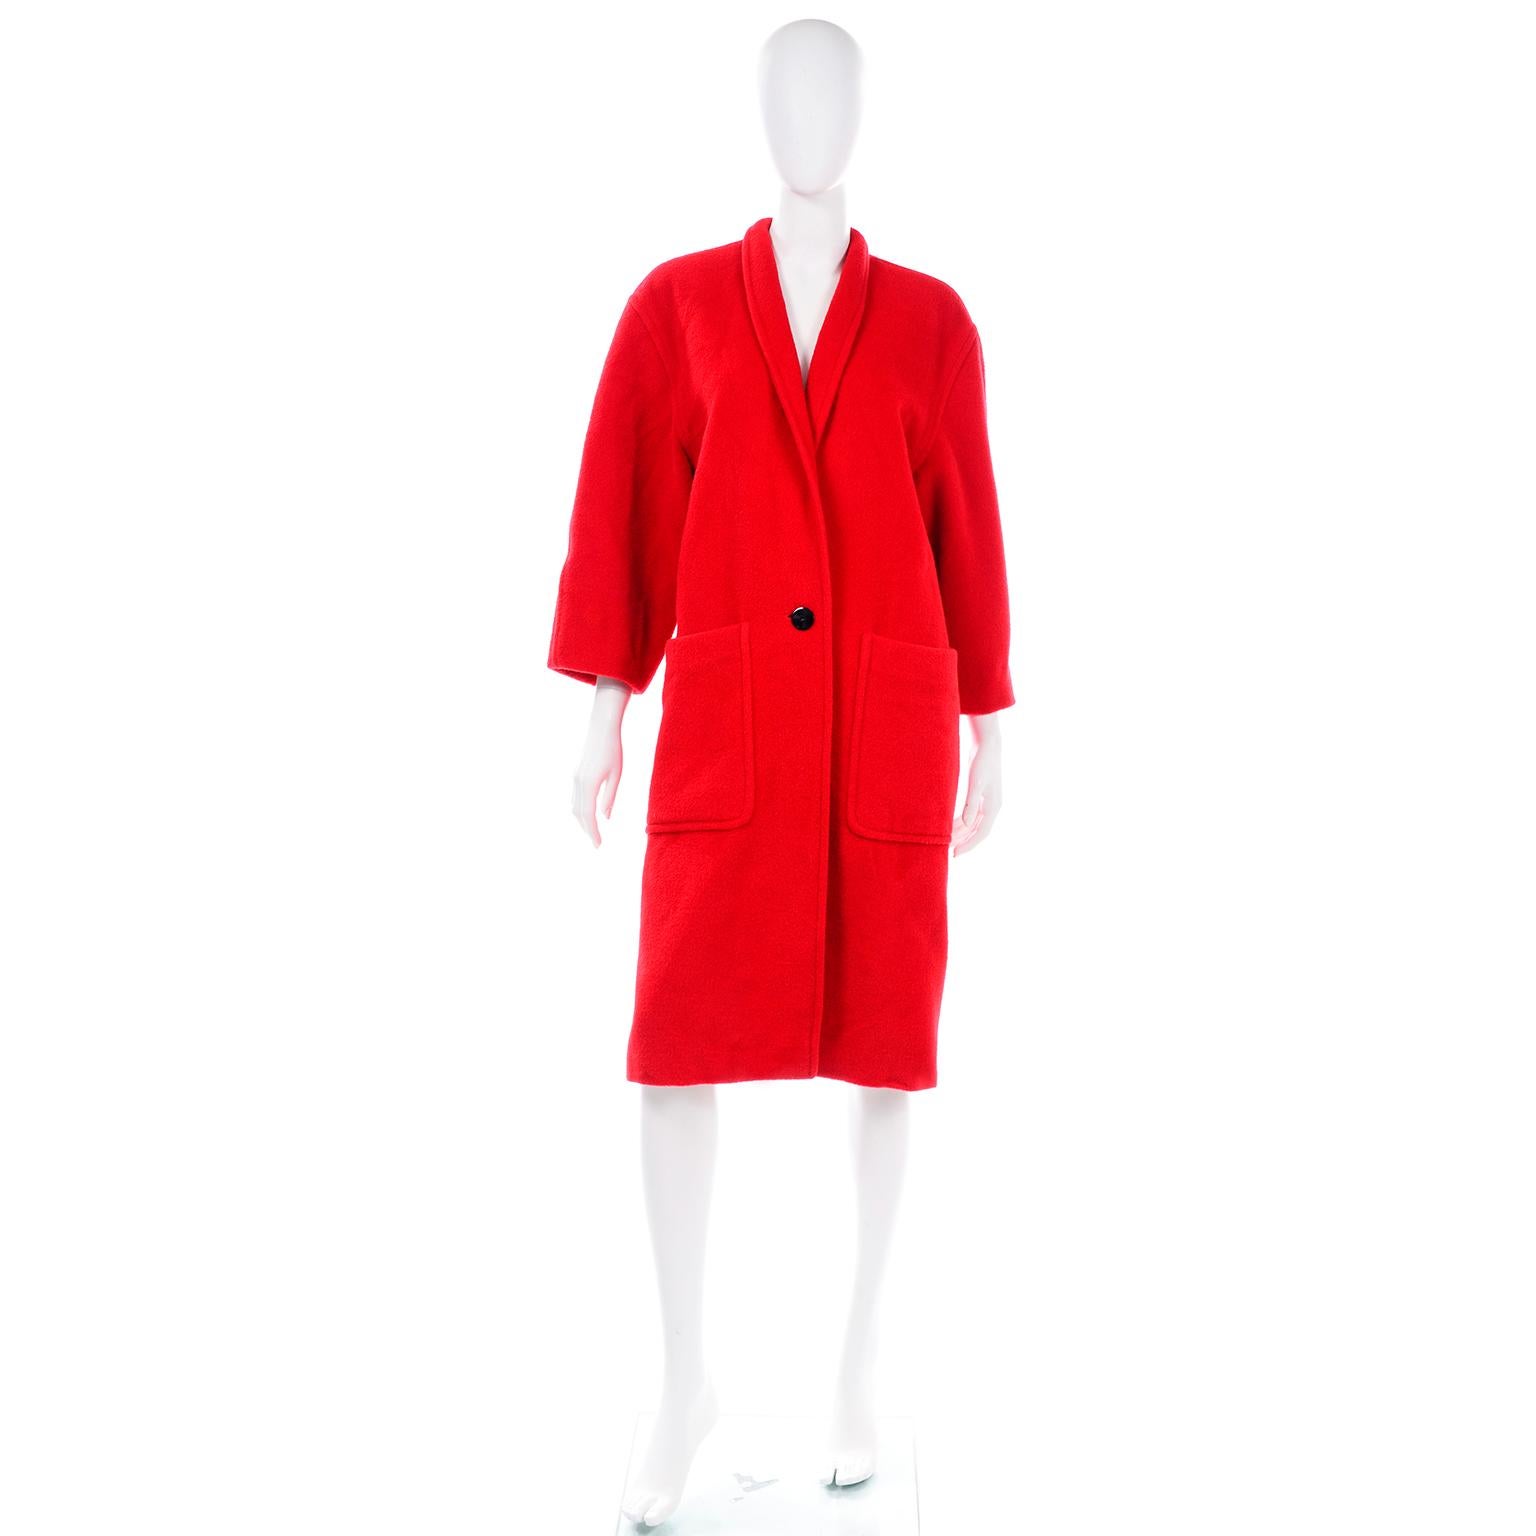 We love this incredible red oversized Escada vintage coat, designed by Margaretha Ley. The red blend 30% Lama 25% New Wool 25% Alpaca 20% Mohair. is slightly felted and textured. This coat has a shawl collar that can easily be folded down for a more